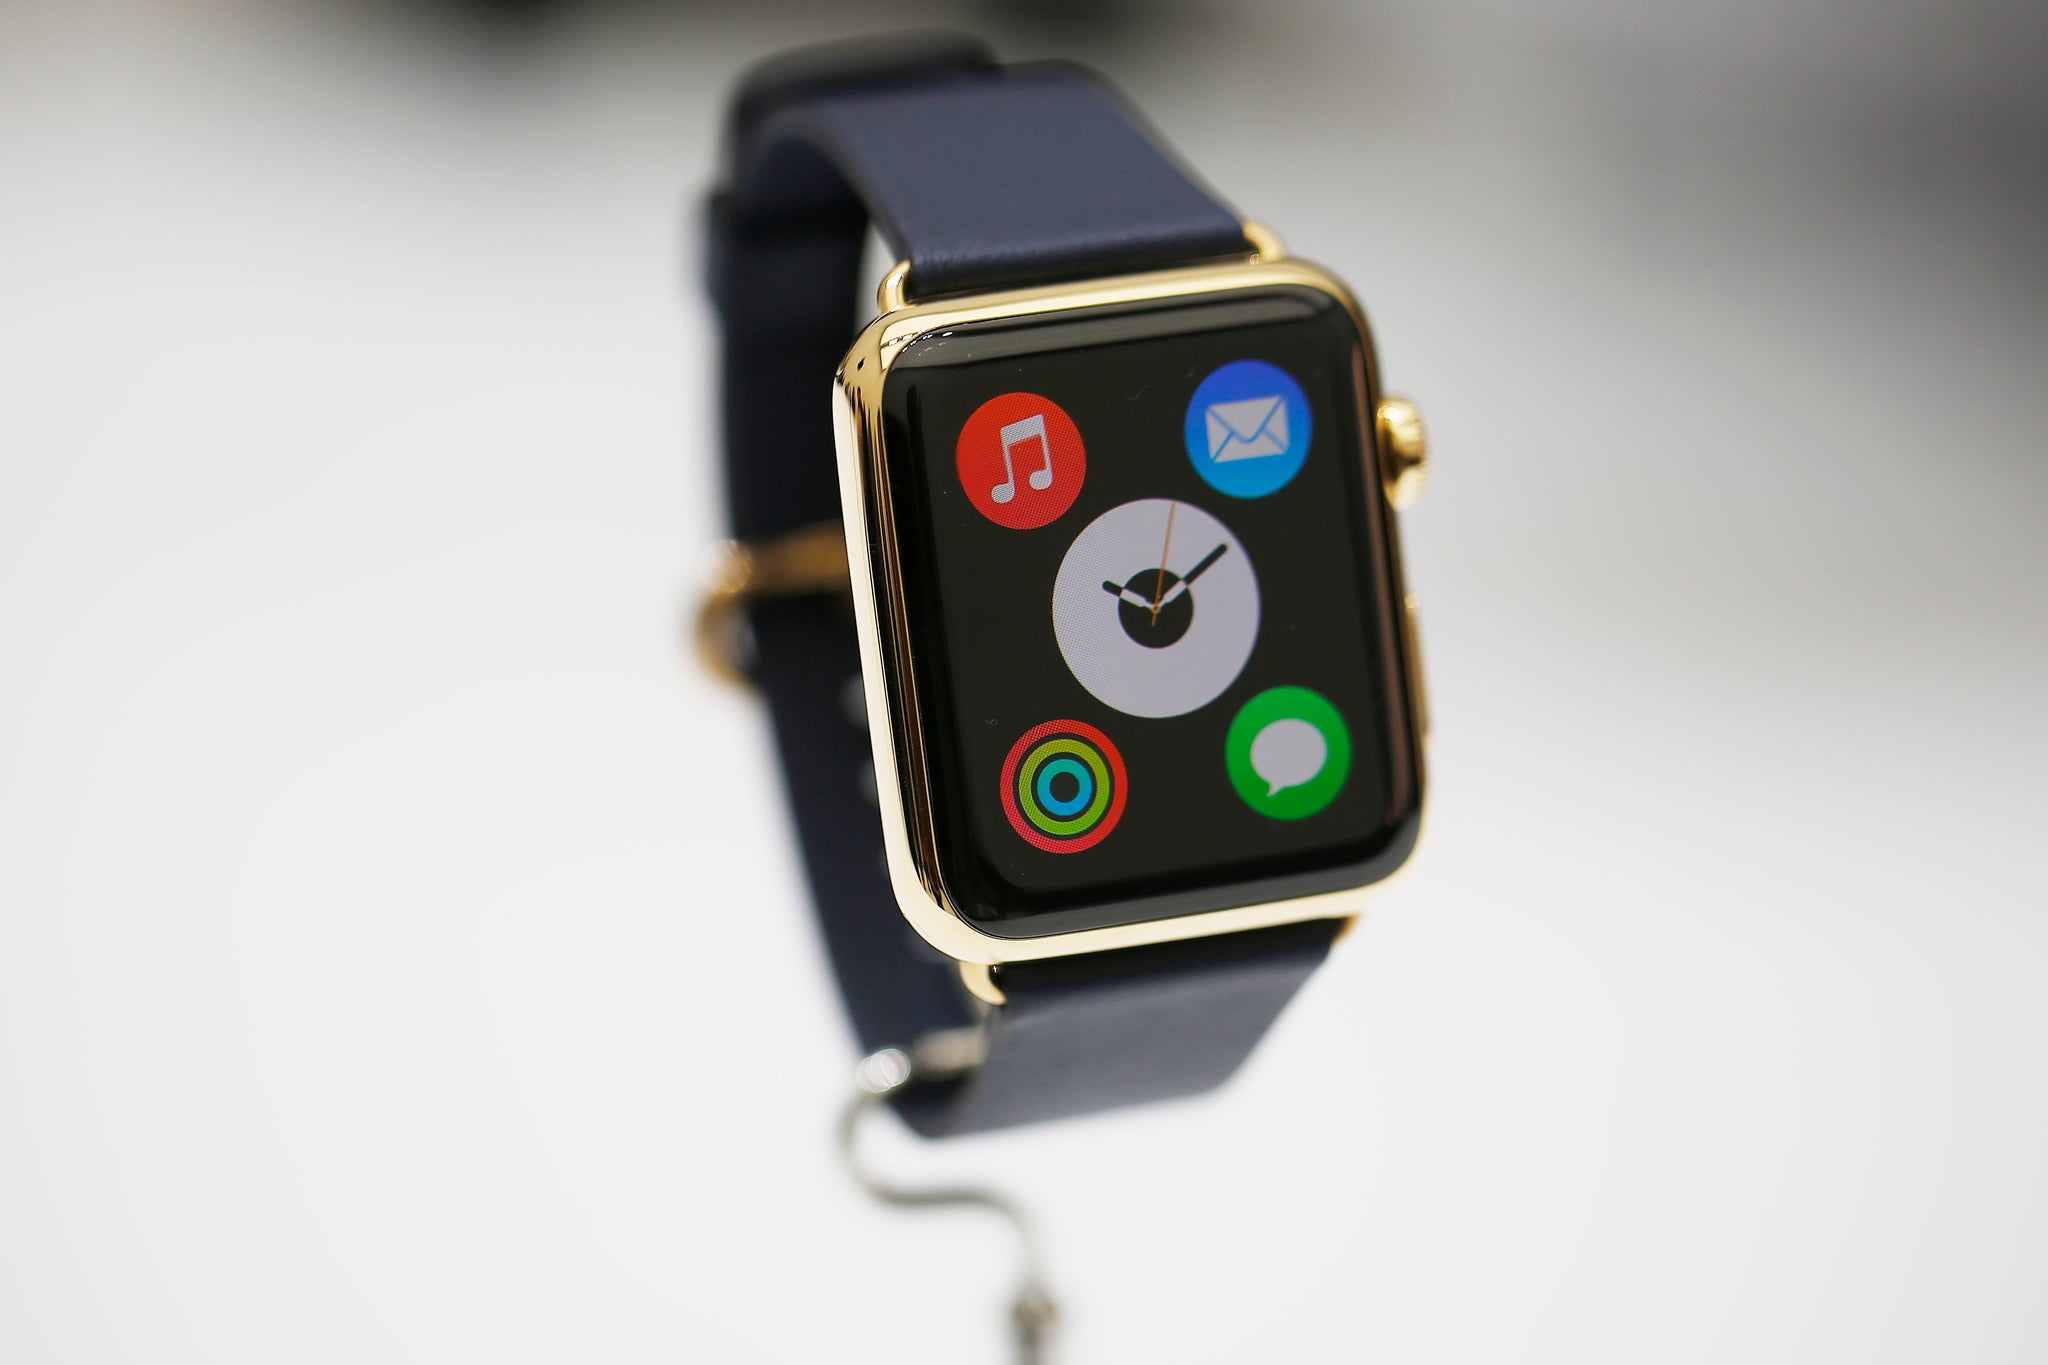 One of the Apple Watch designs unveiled by CEO Tim Cook yesterday